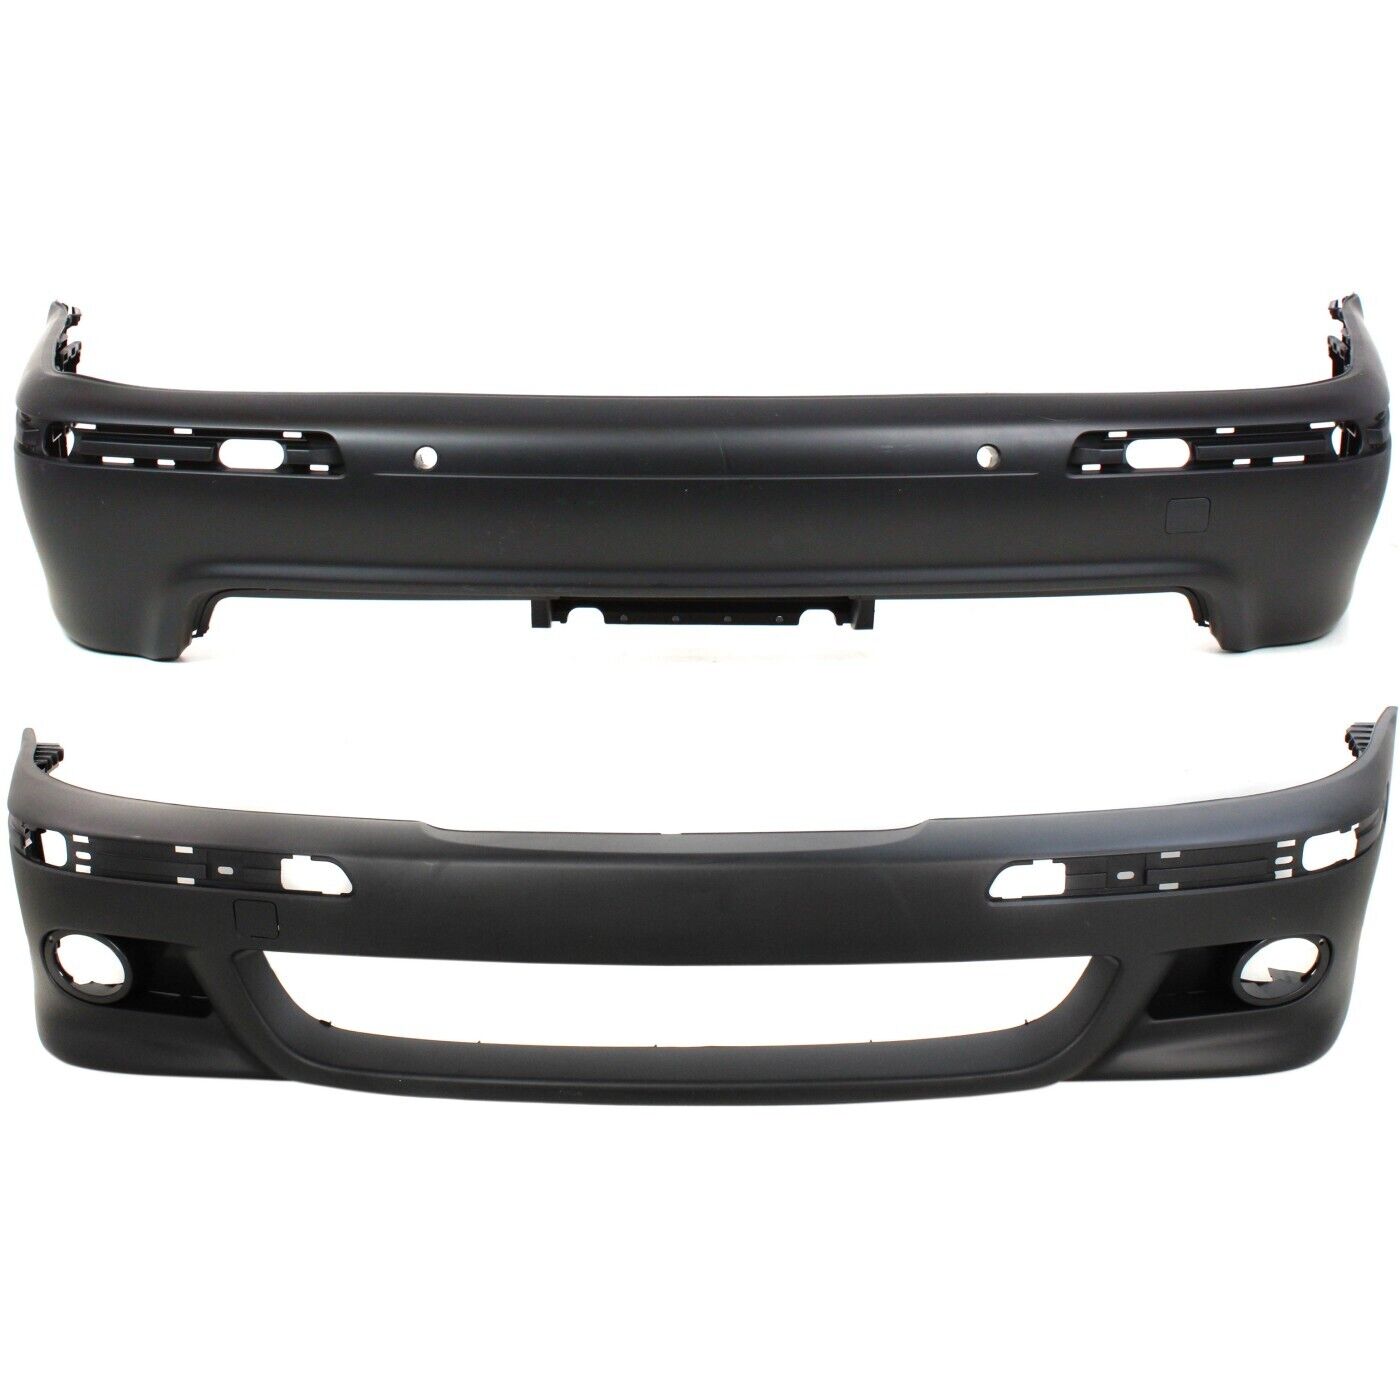 Bumper Cover Front and Rear Set For 2000-03 BMW M5 With Parking Aid Sensor Holes